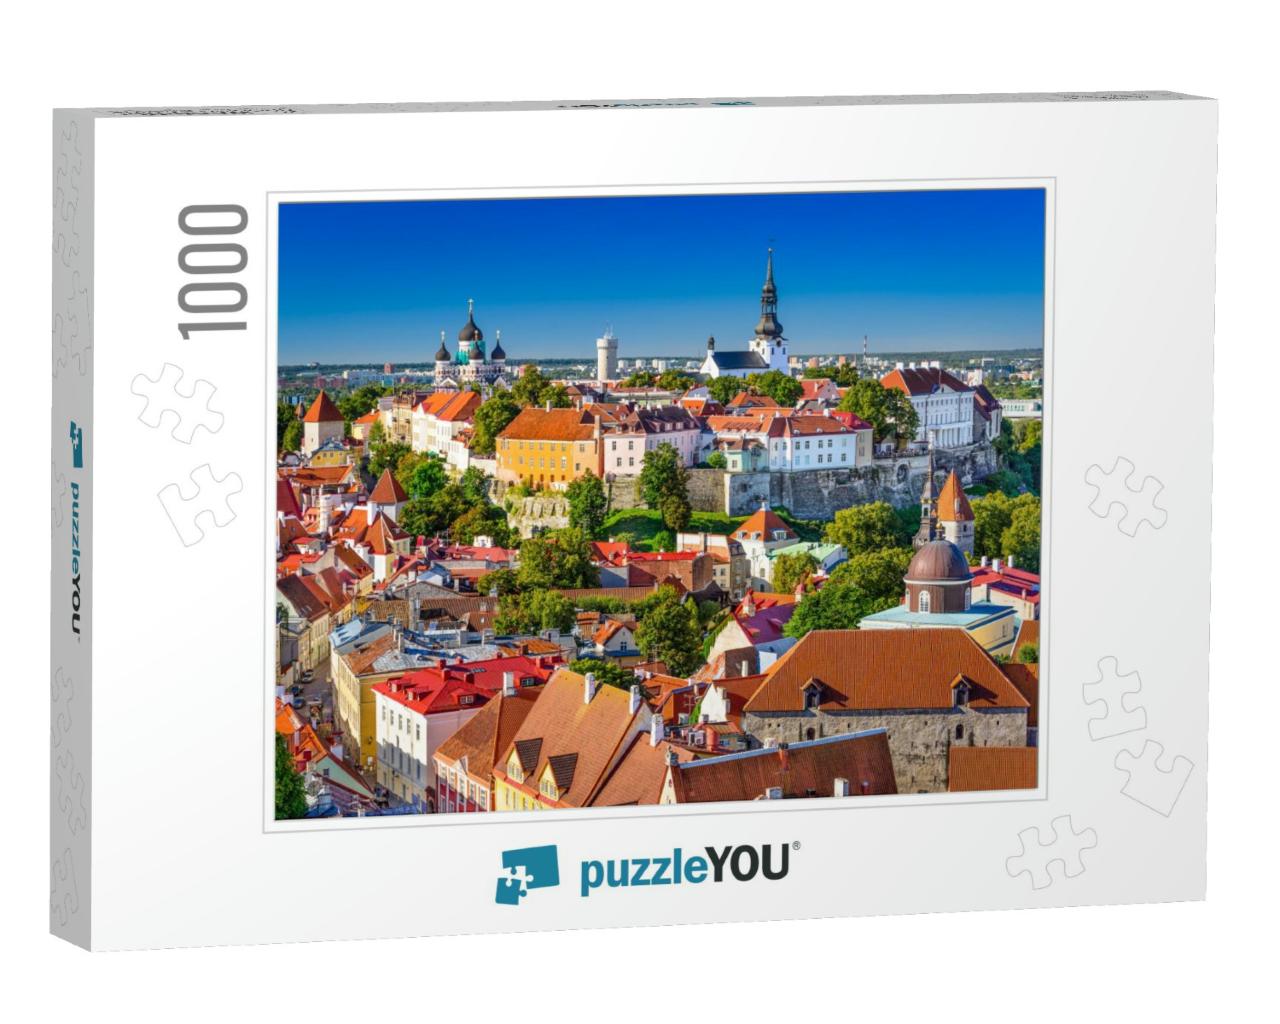 Tallinn, Estonia, Old Town Skyline of Toompea Hill... Jigsaw Puzzle with 1000 pieces